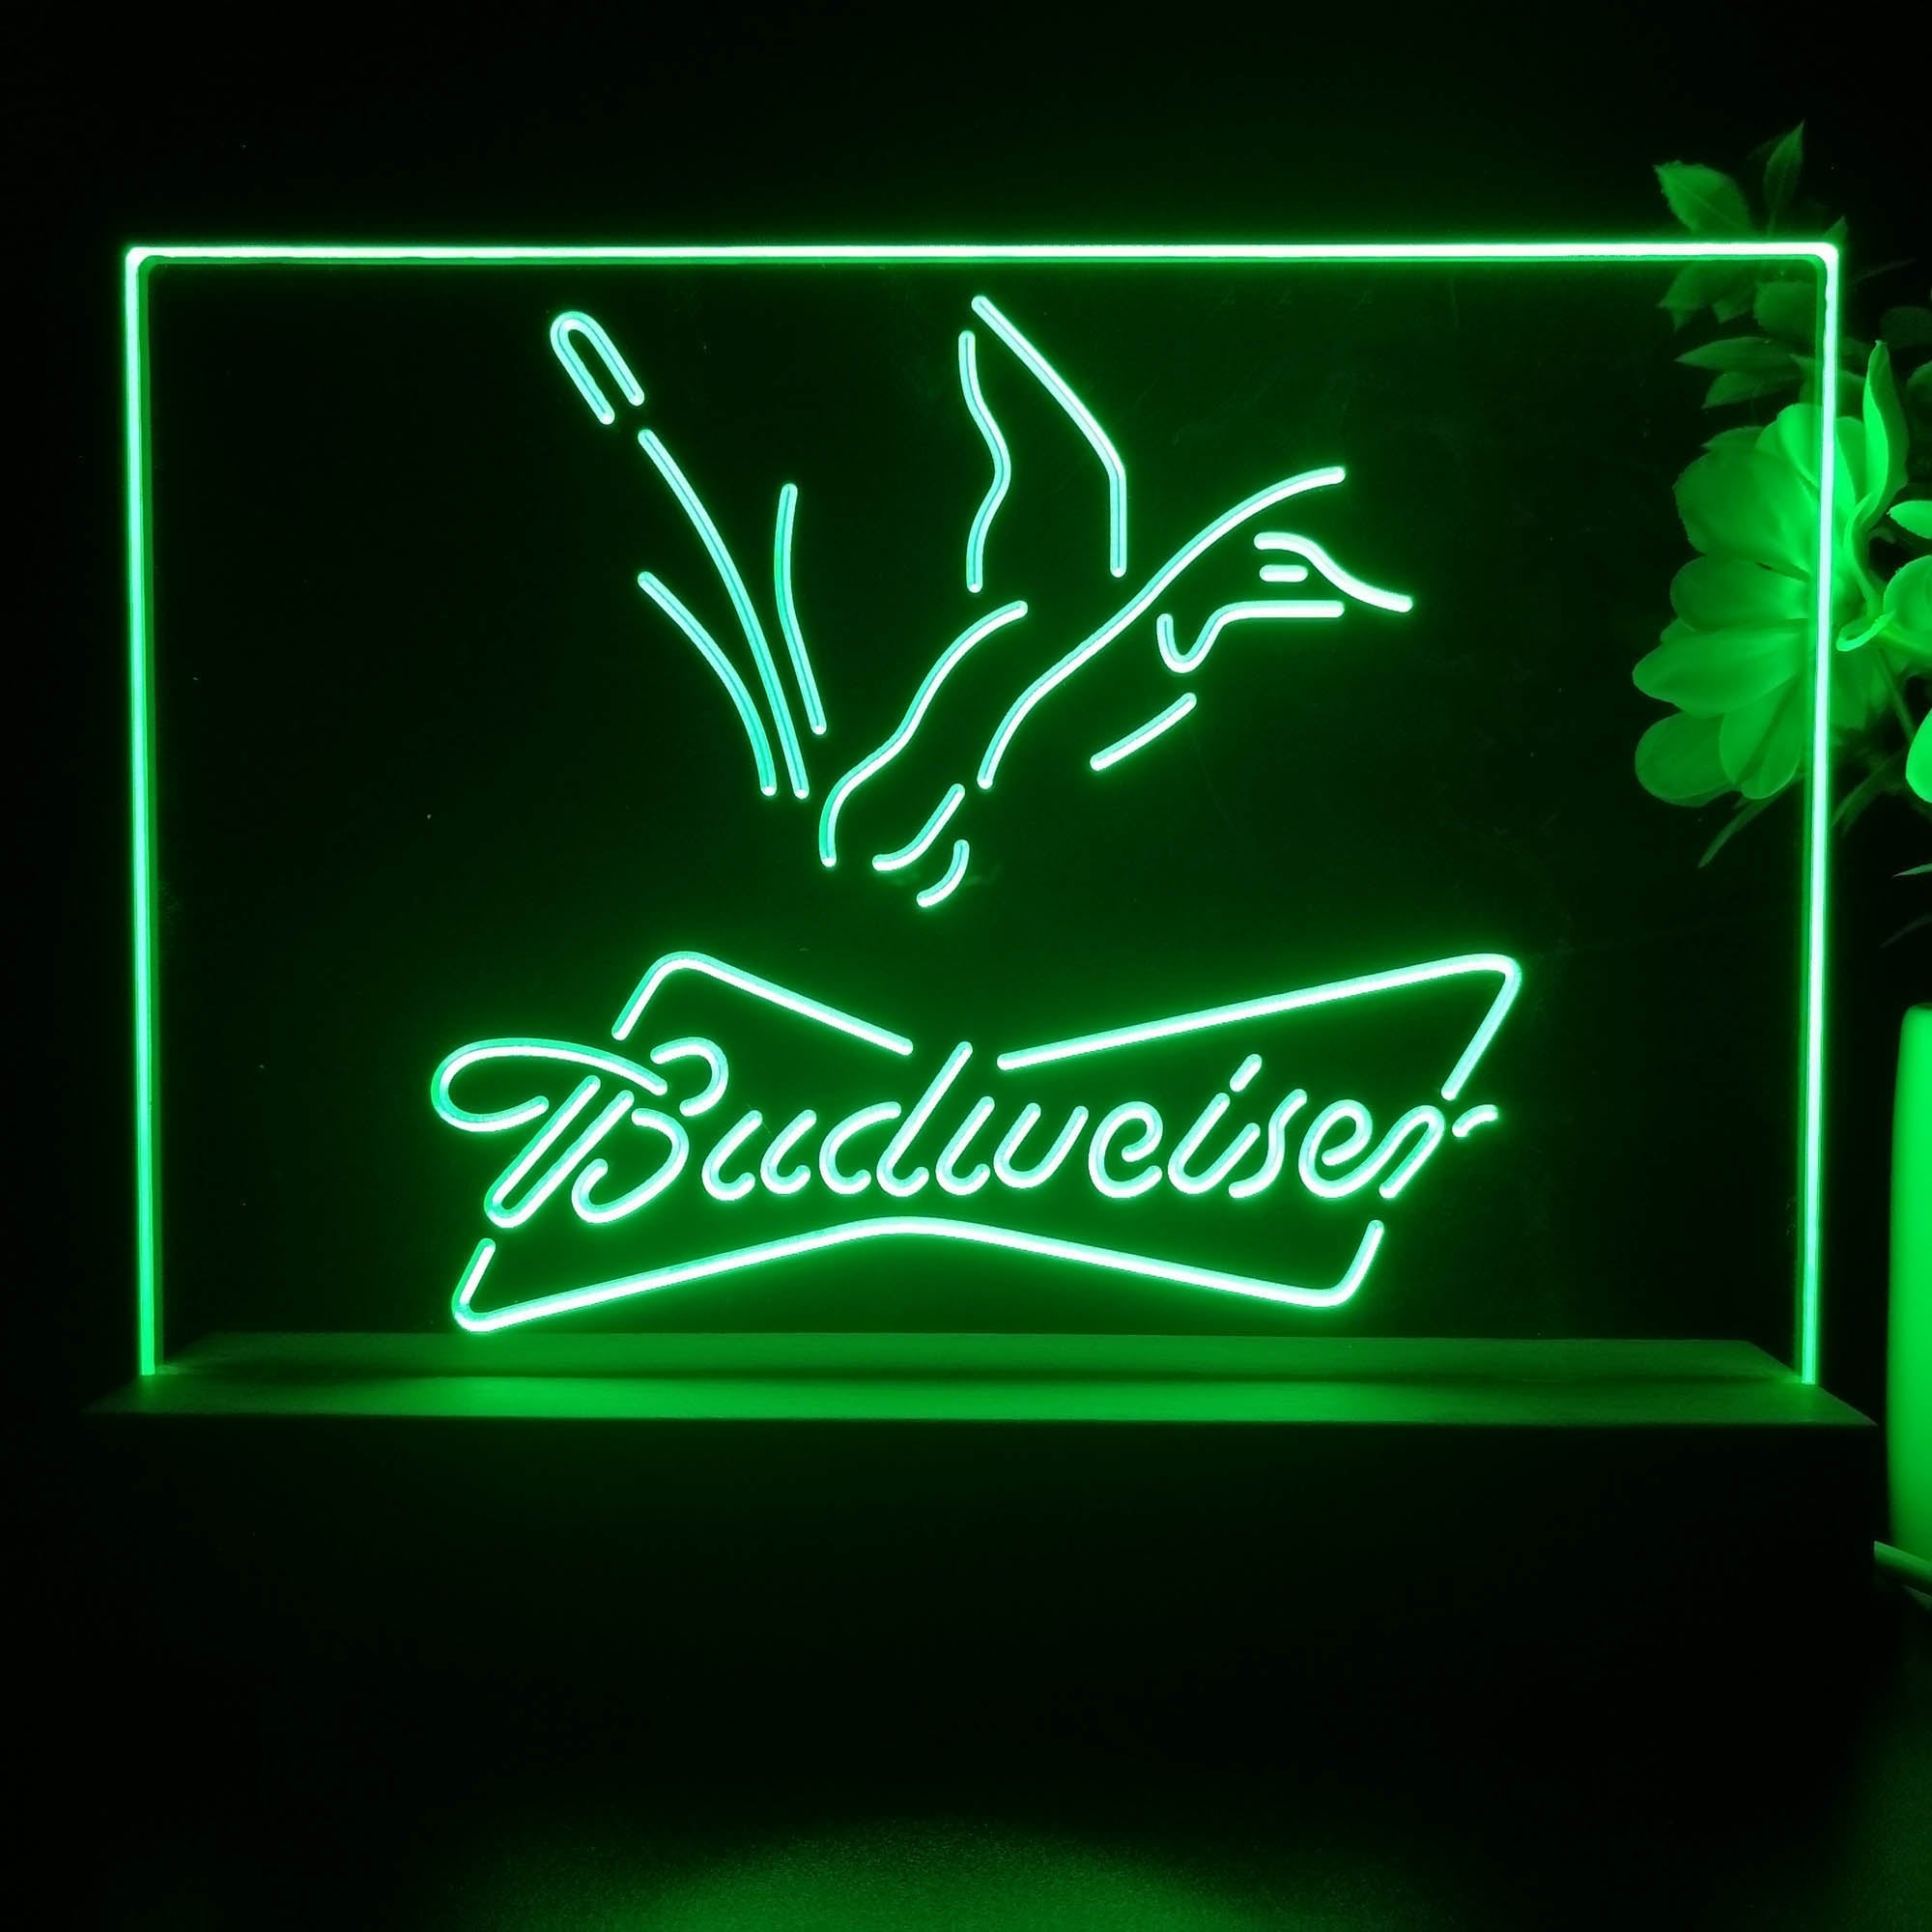 Budweisers Duck Hunting Home Beer Bar Decoration Gifts Neon Sign Pub Bar Lamp